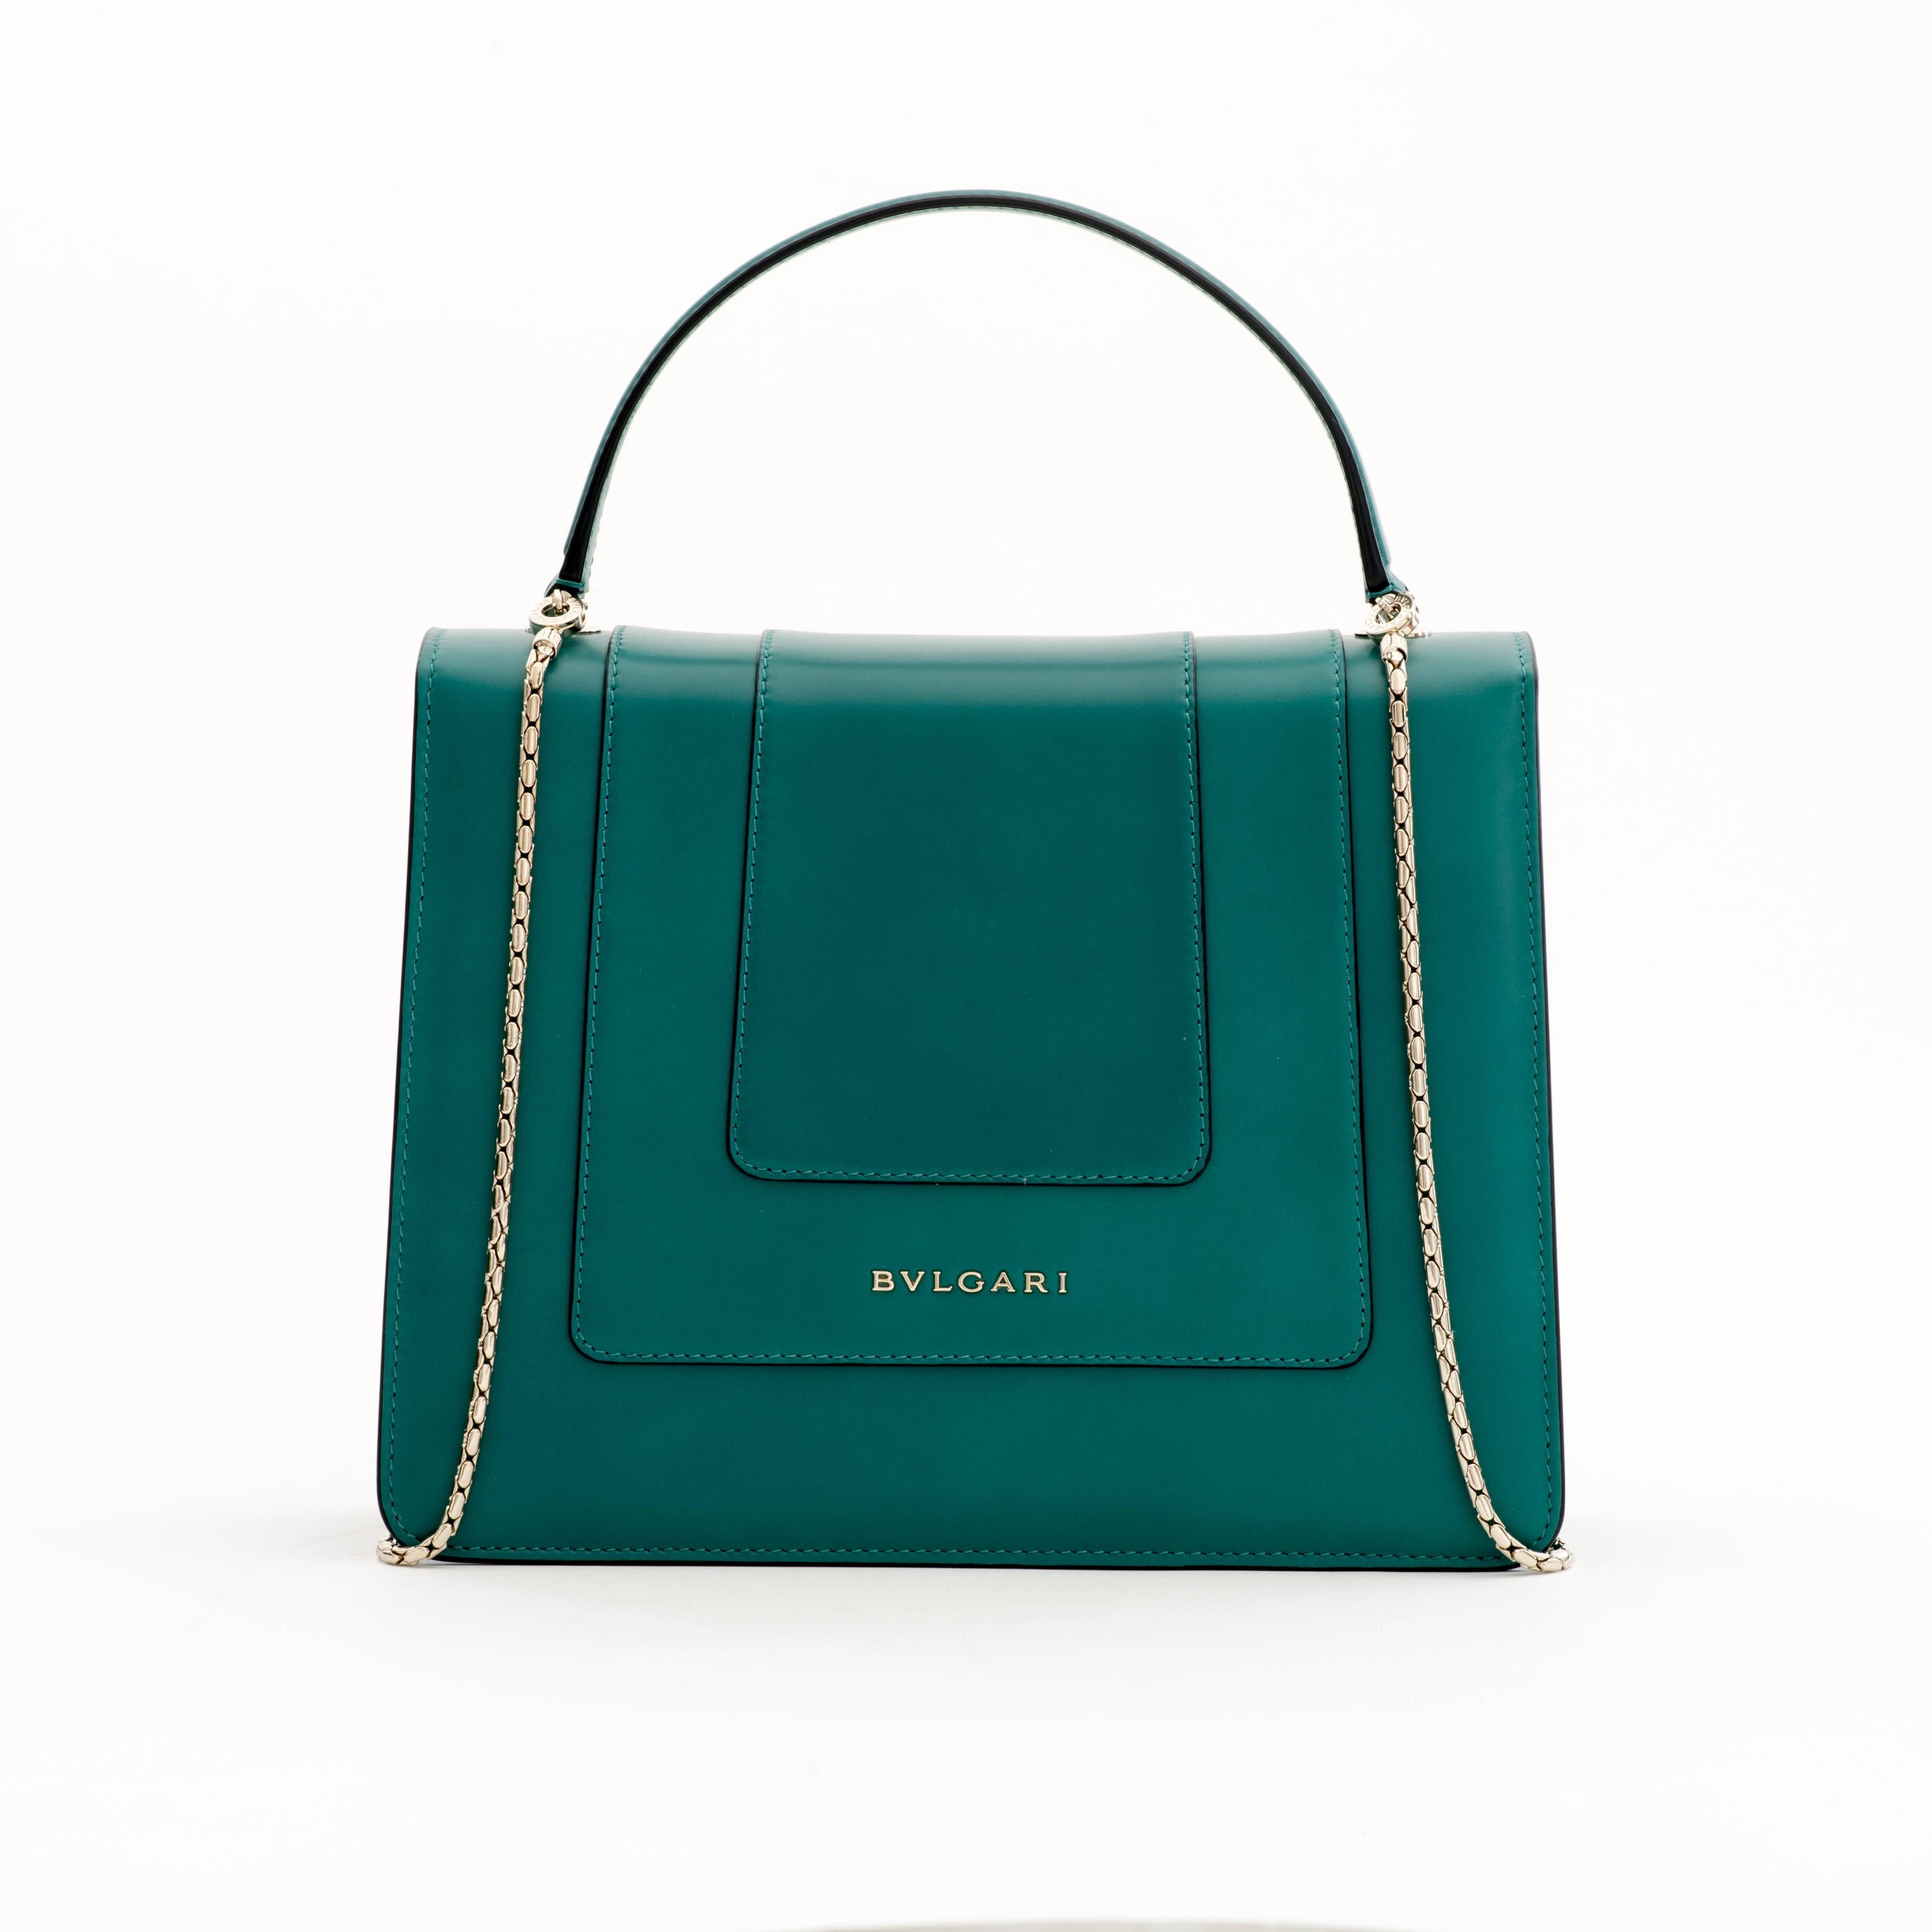 The Serpenti Bag first came out in 2012 and was inspired by the Bulgari wraparound watch. 

It features a light gold plate Snake head (Serpenti) closure. The Serpenti's eyes are made of malachite. The bag features a detachable chain strap in a